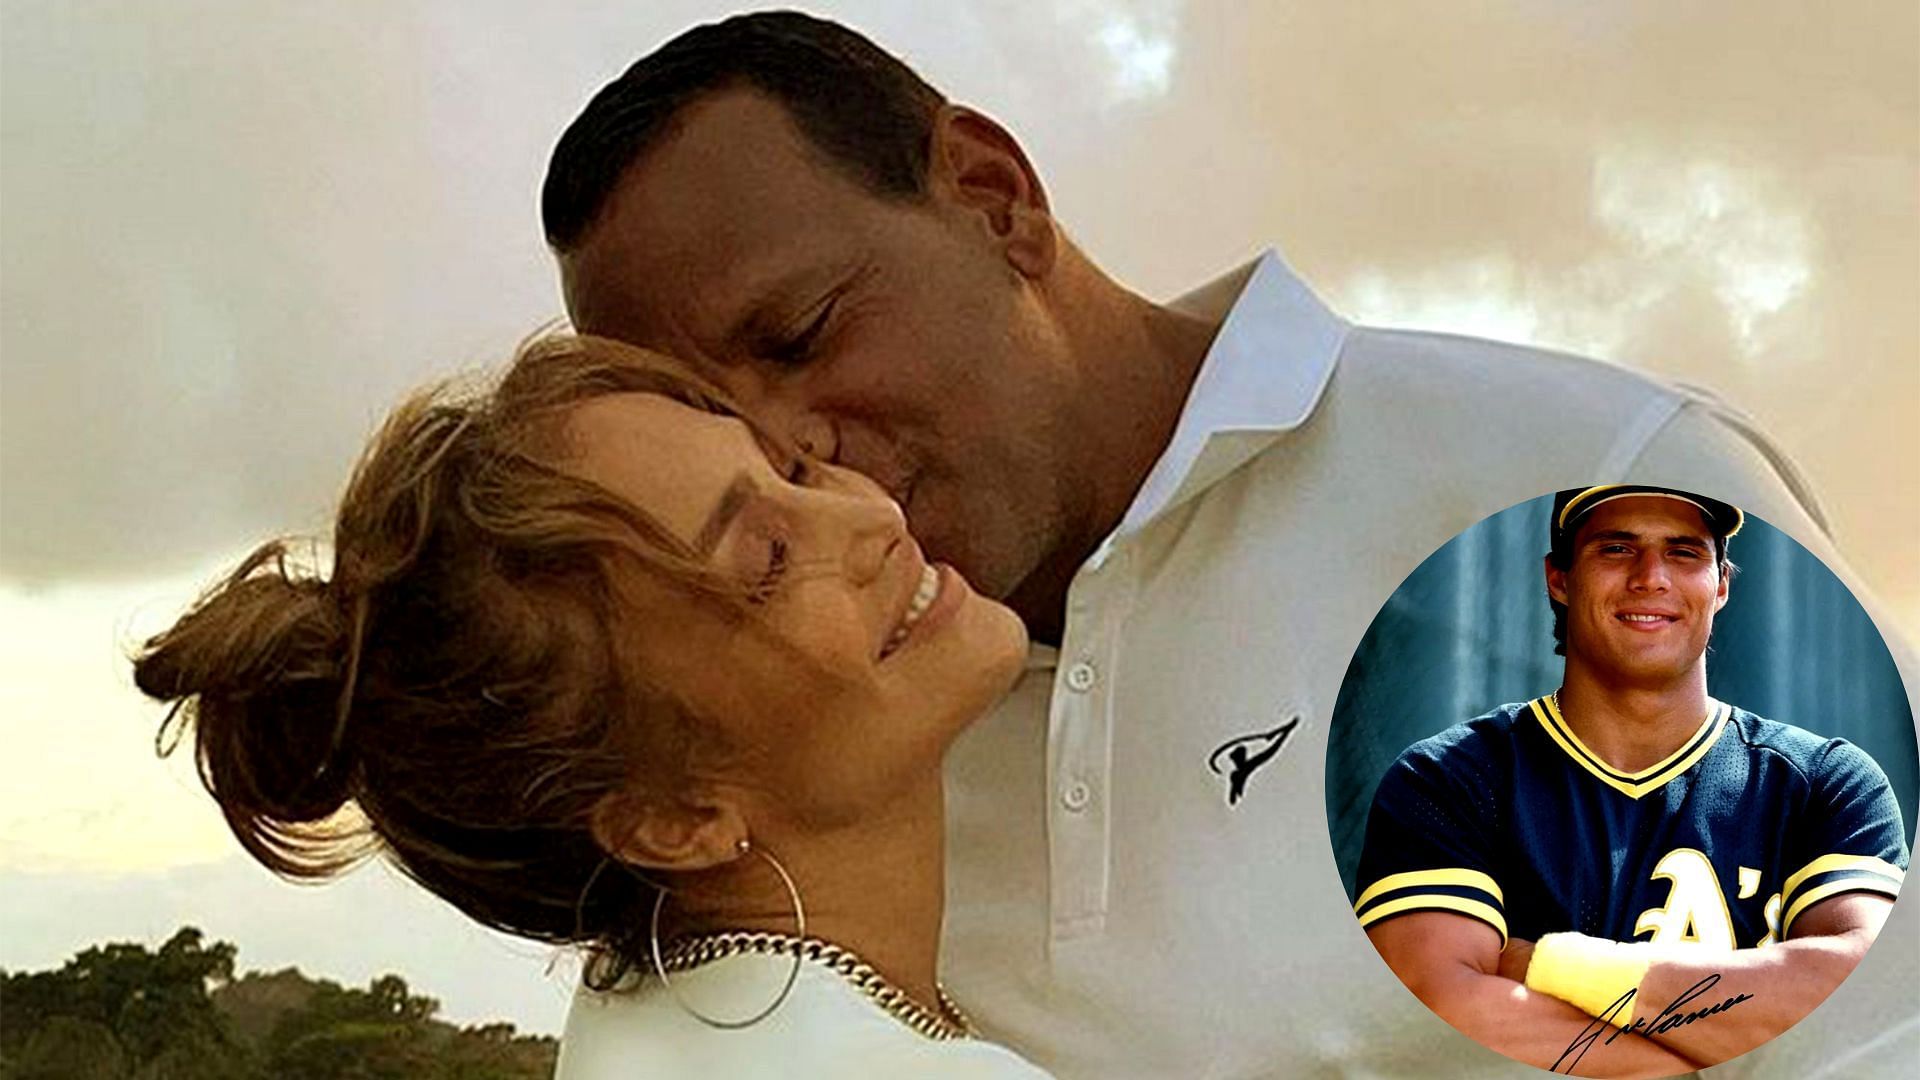 Alex Rodriguez and Jennifer Lopez will go their separate ways - Former MLB  star Jose Canseco predicted Alex Rodriguez and J.Lo's breakup and  possibility of Yankees superstar hooking up with fitness model